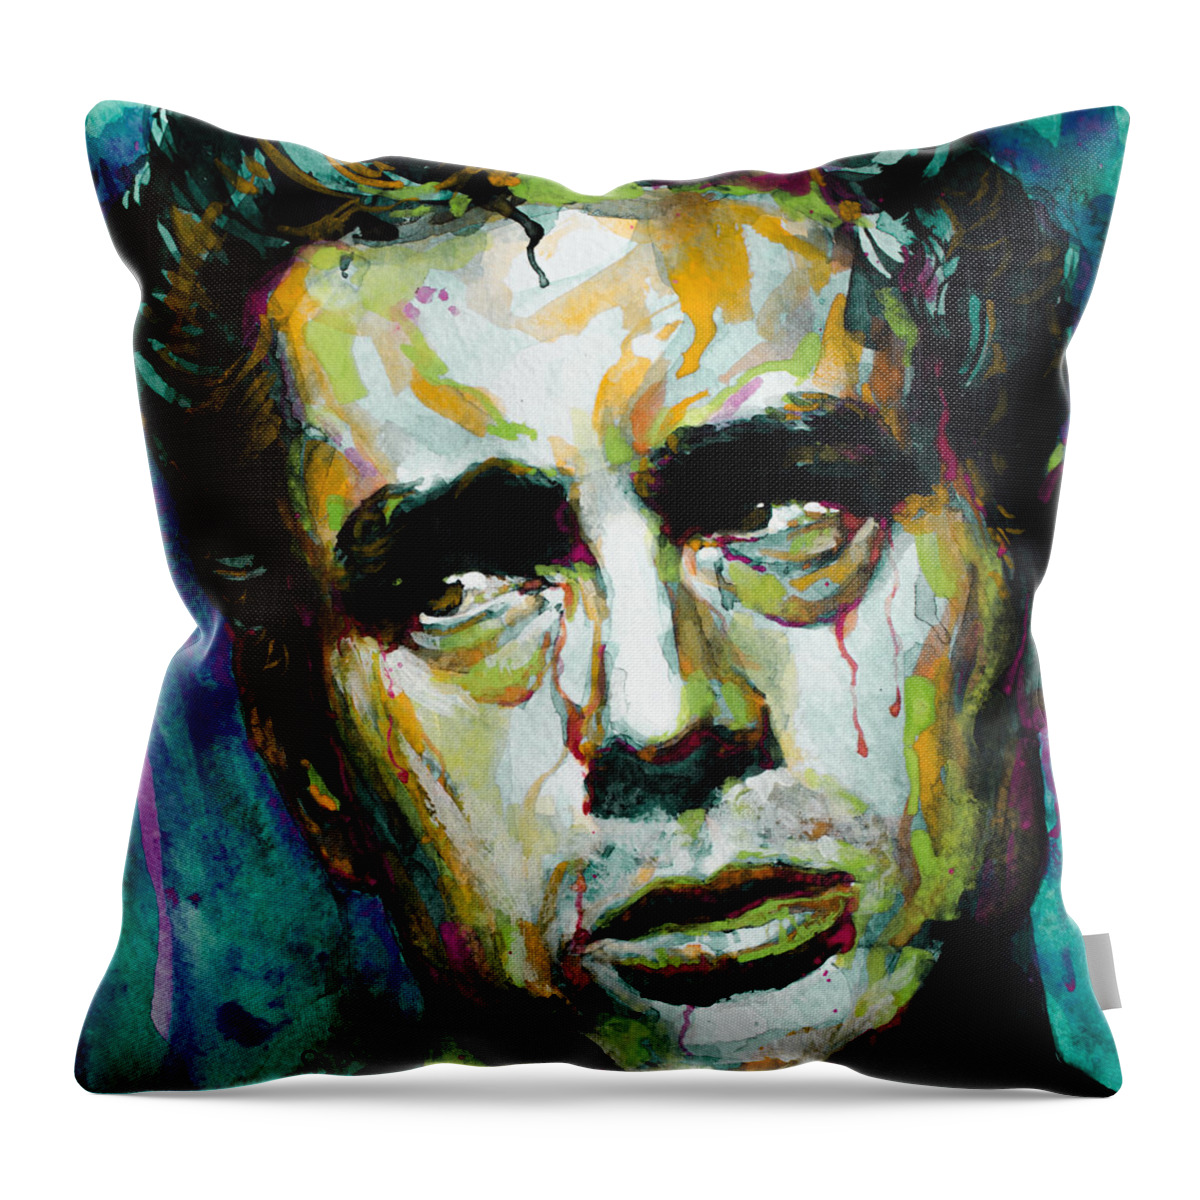 James Dean Throw Pillow featuring the painting Rebel Without A Cause 4 by Laur Iduc